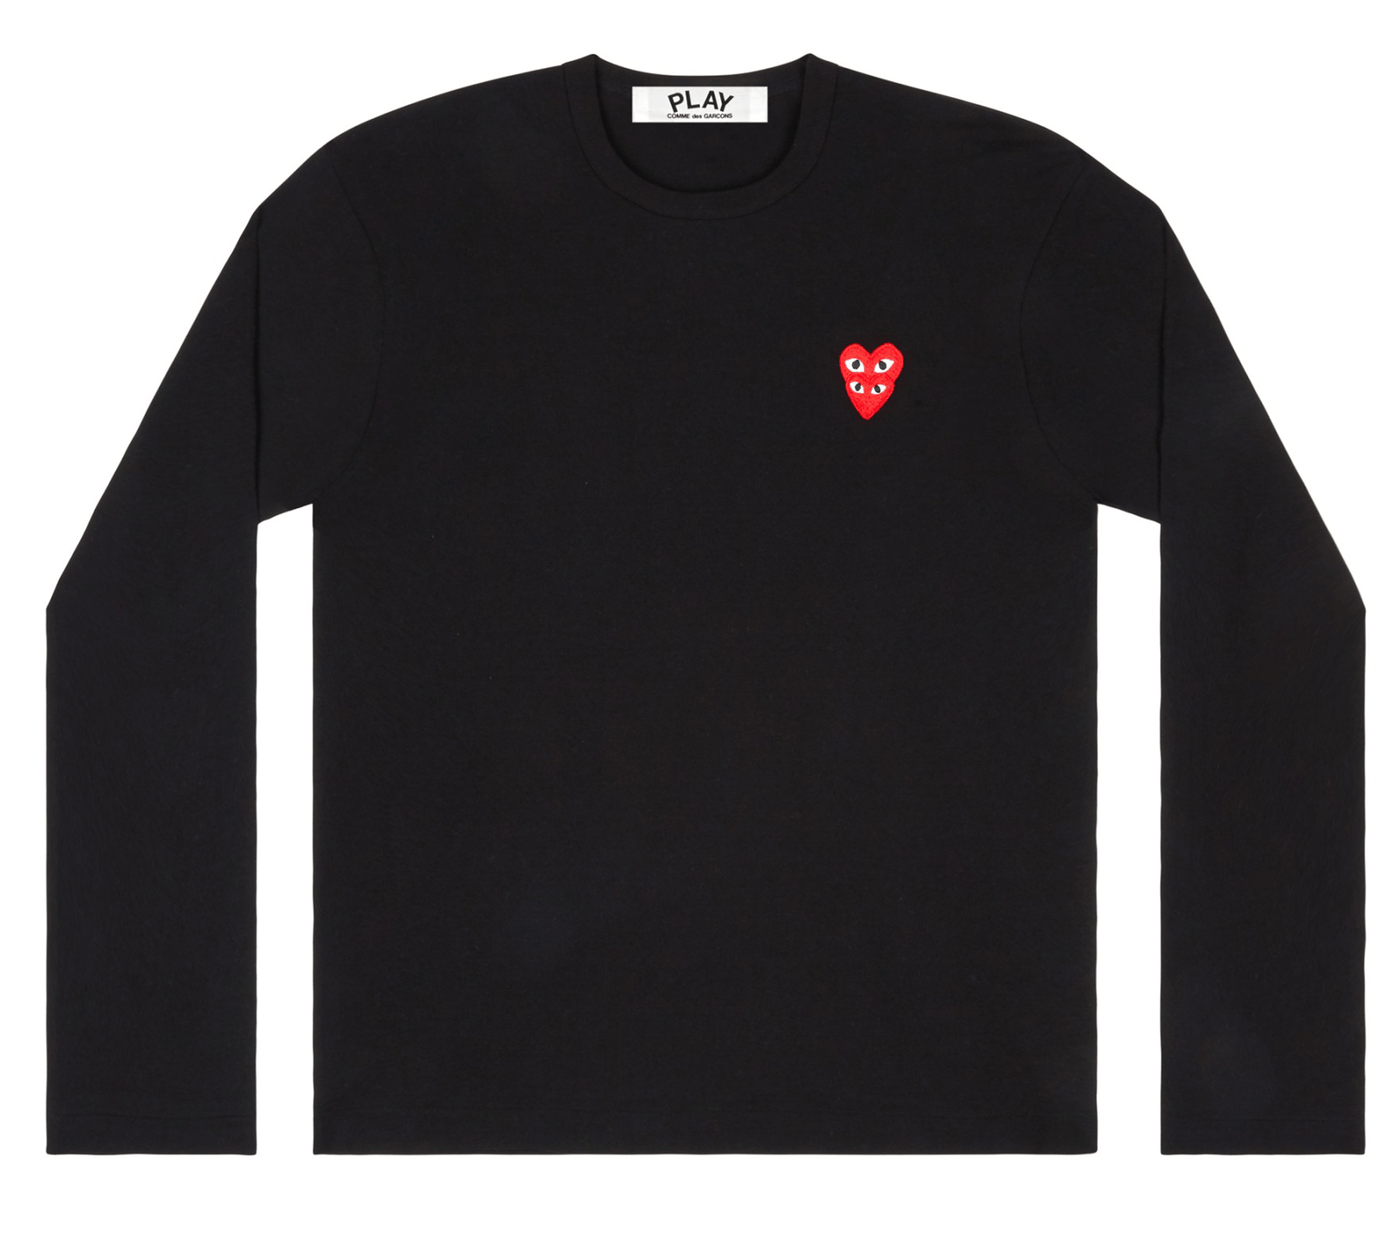 Comme-des-Garcons-Play-Long-Sleeve-T-Shirt-With-Stacked-Red-Emblem-Men-Black-1